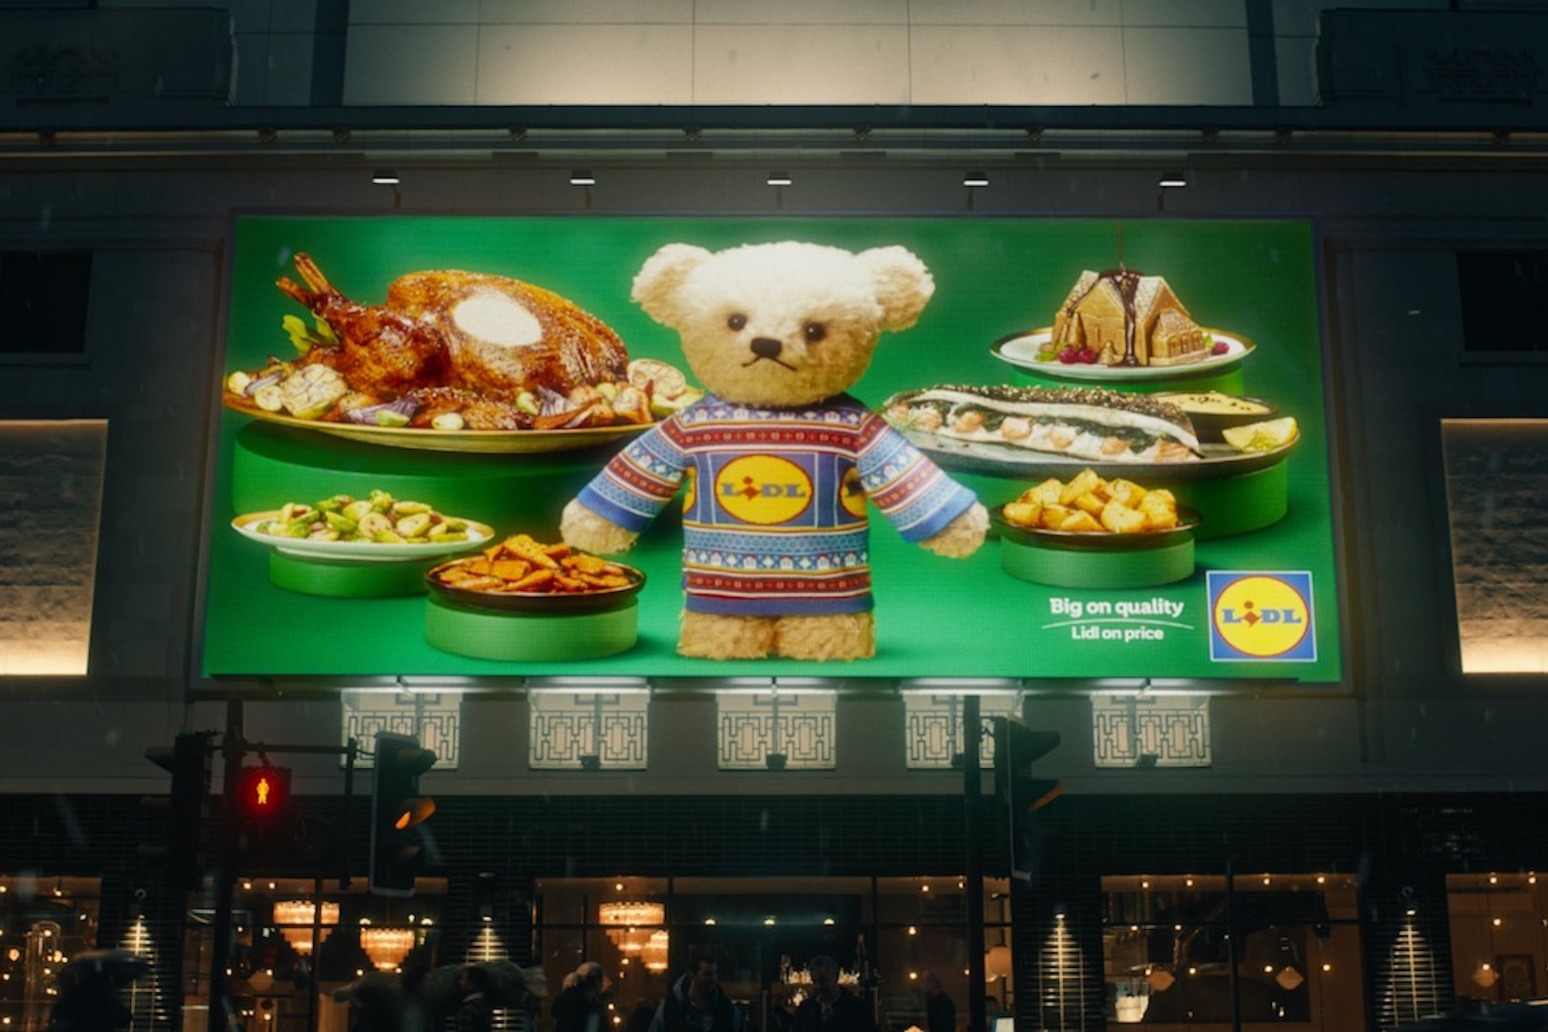 Poker-faced Lidl Bear who finds fame in Christmas ad delivers important message 